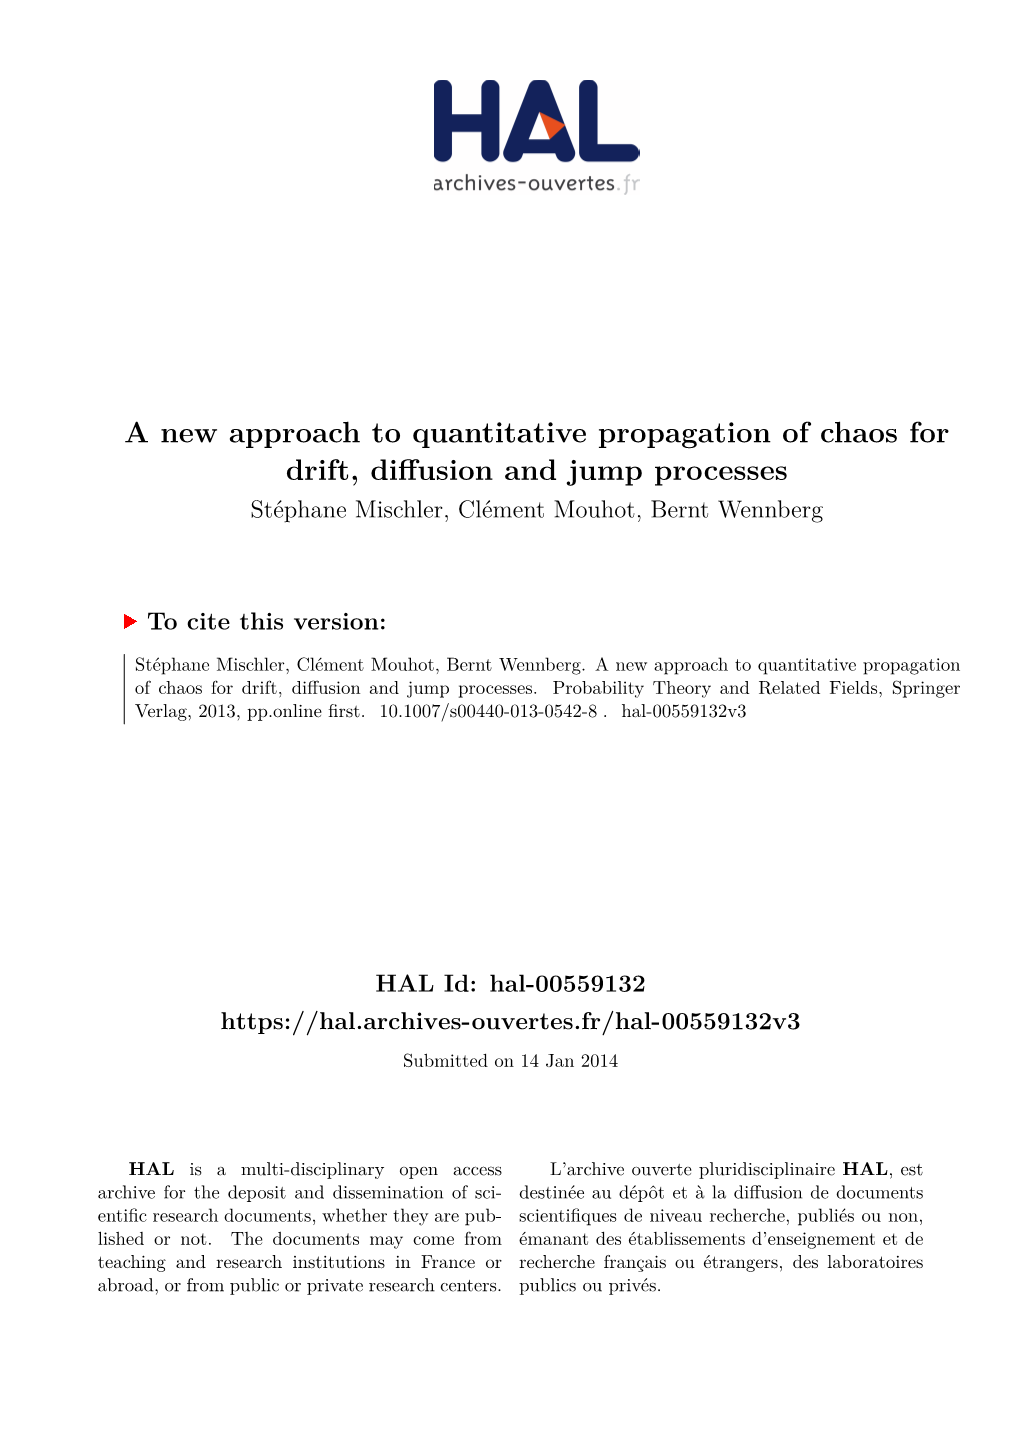 A New Approach to Quantitative Propagation of Chaos for Drift, Diffusion and Jump Processes Stéphane Mischler, Clément Mouhot, Bernt Wennberg